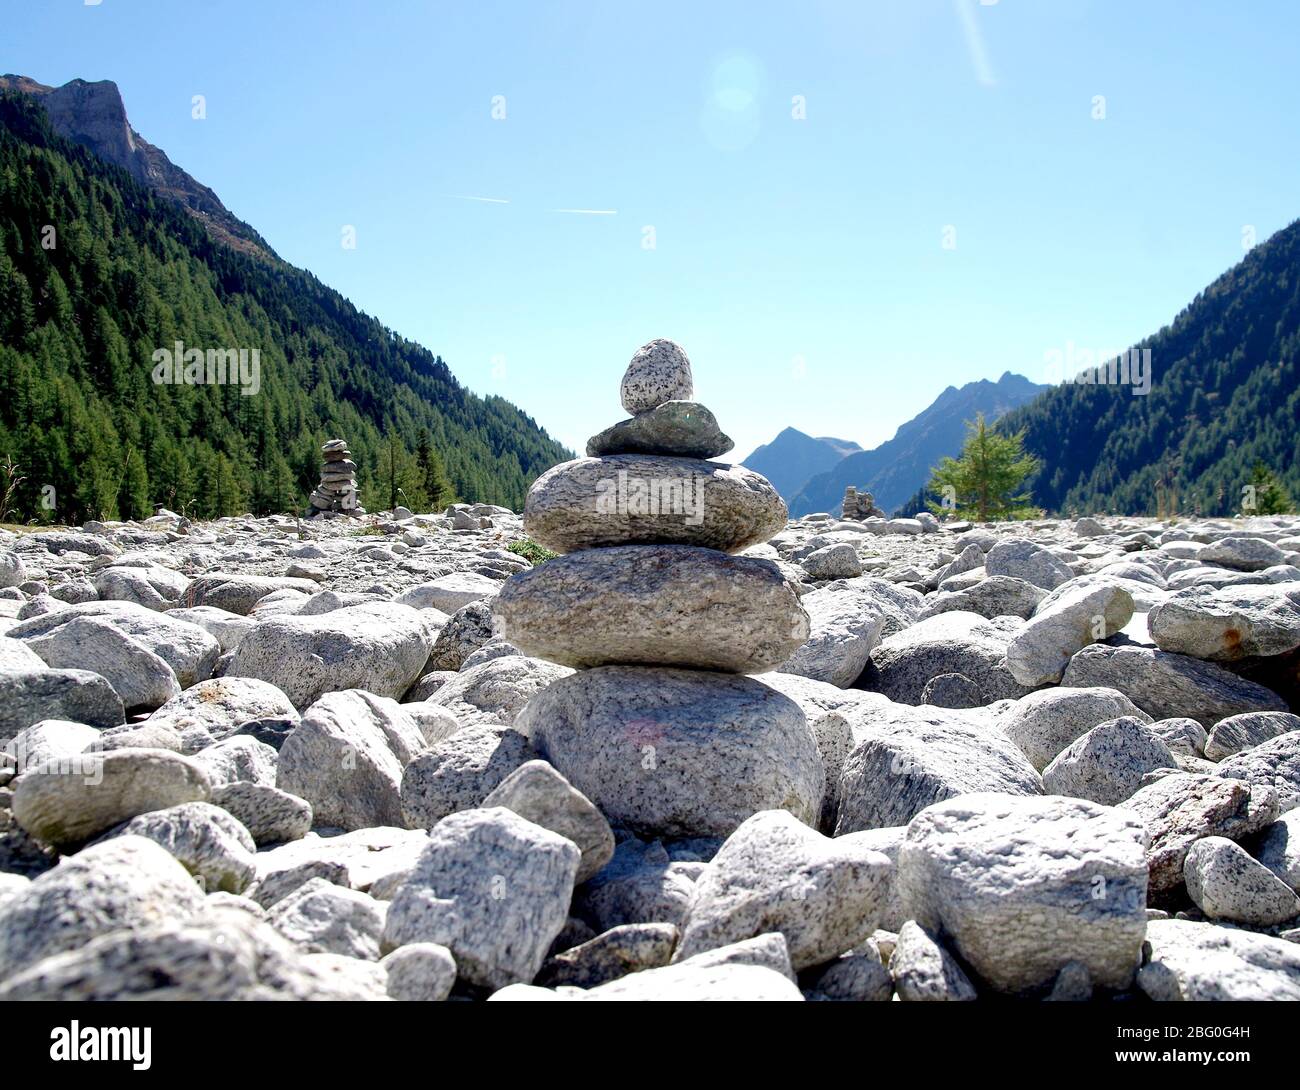 stone pyramids, little man, mound, ovoo, Inukshuk built for your calm and tranquility in the blue sky Stock Photo